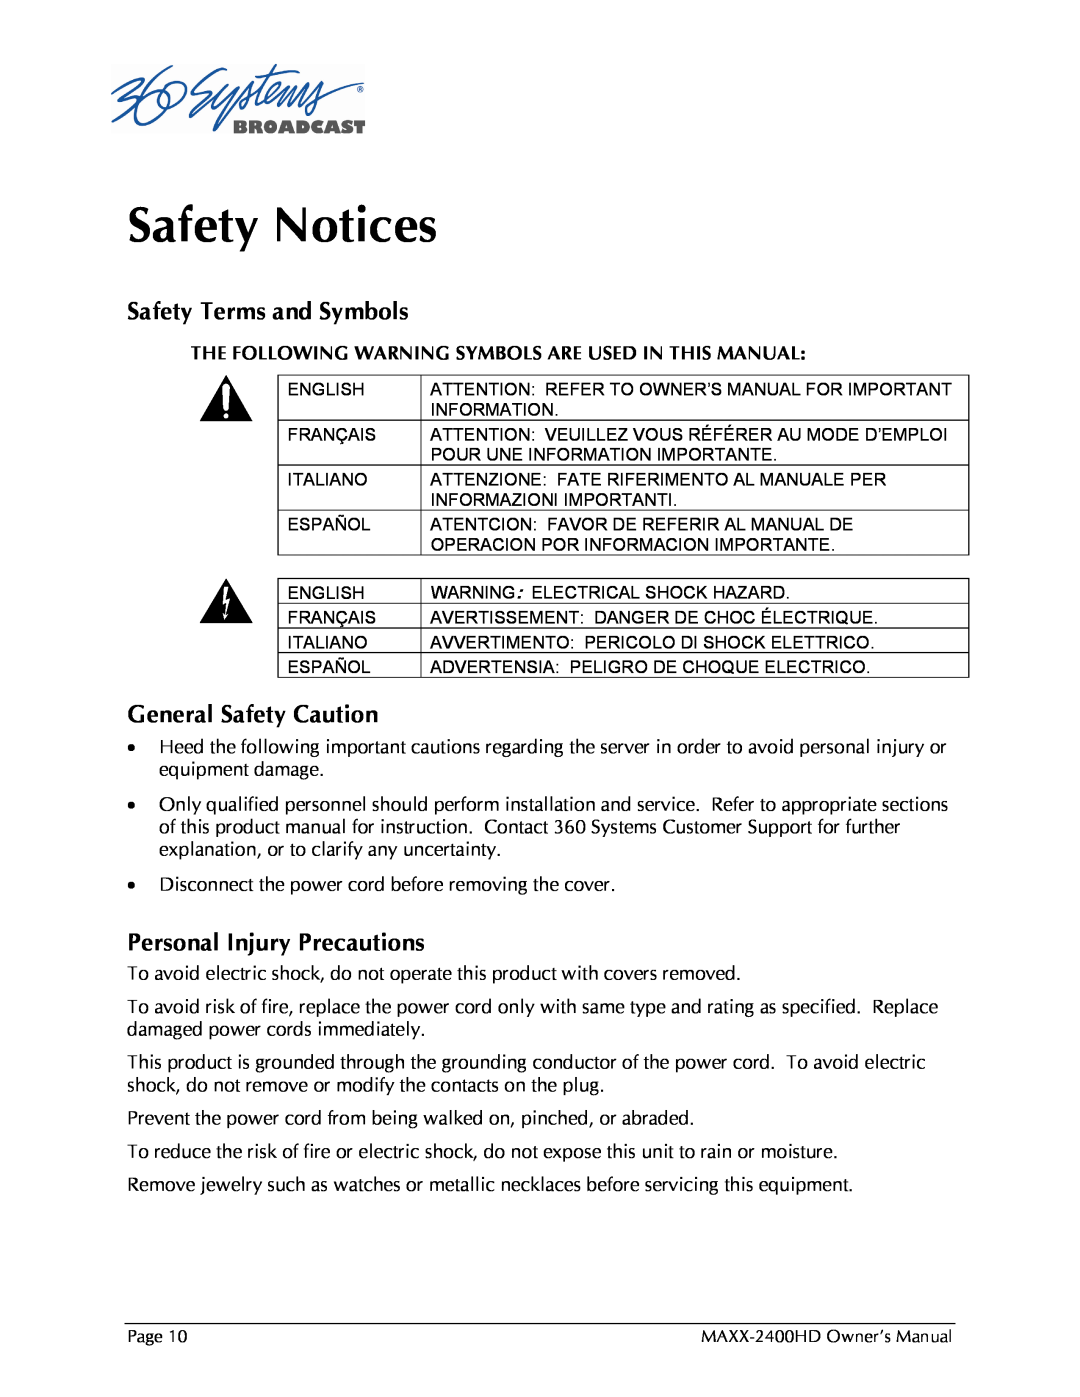 Maxxsonics MAXX-2400HD manual Safety Notices, Safety Terms and Symbols, General Safety Caution, Personal Injury Precautions 